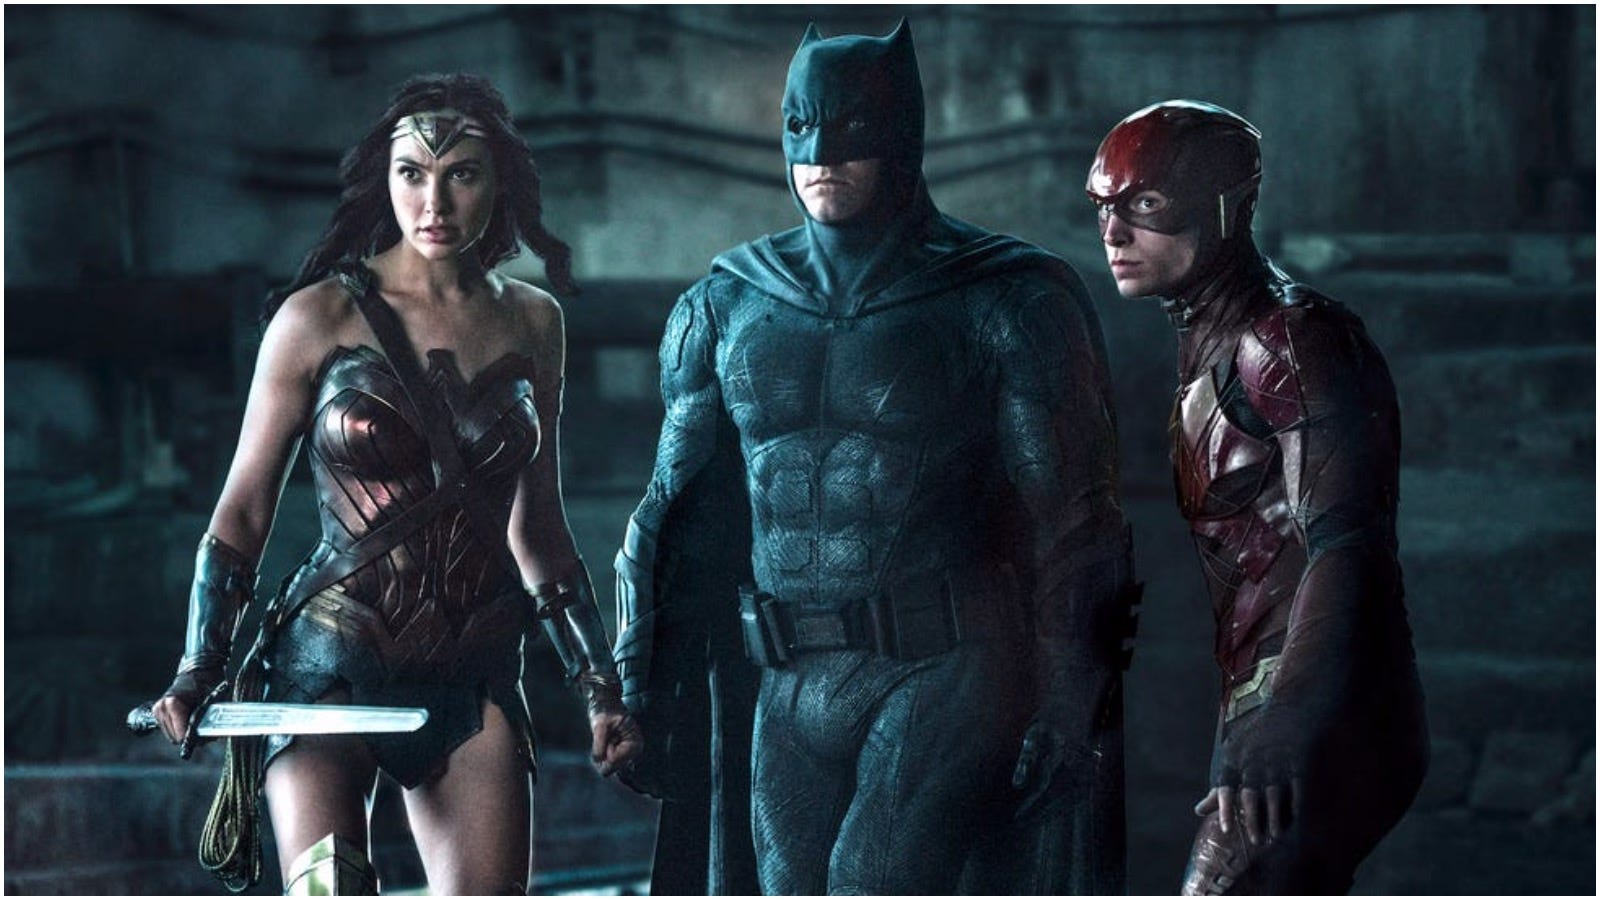 Fans react to Zack Snyder releasing Snyder Cut of 'Justice League